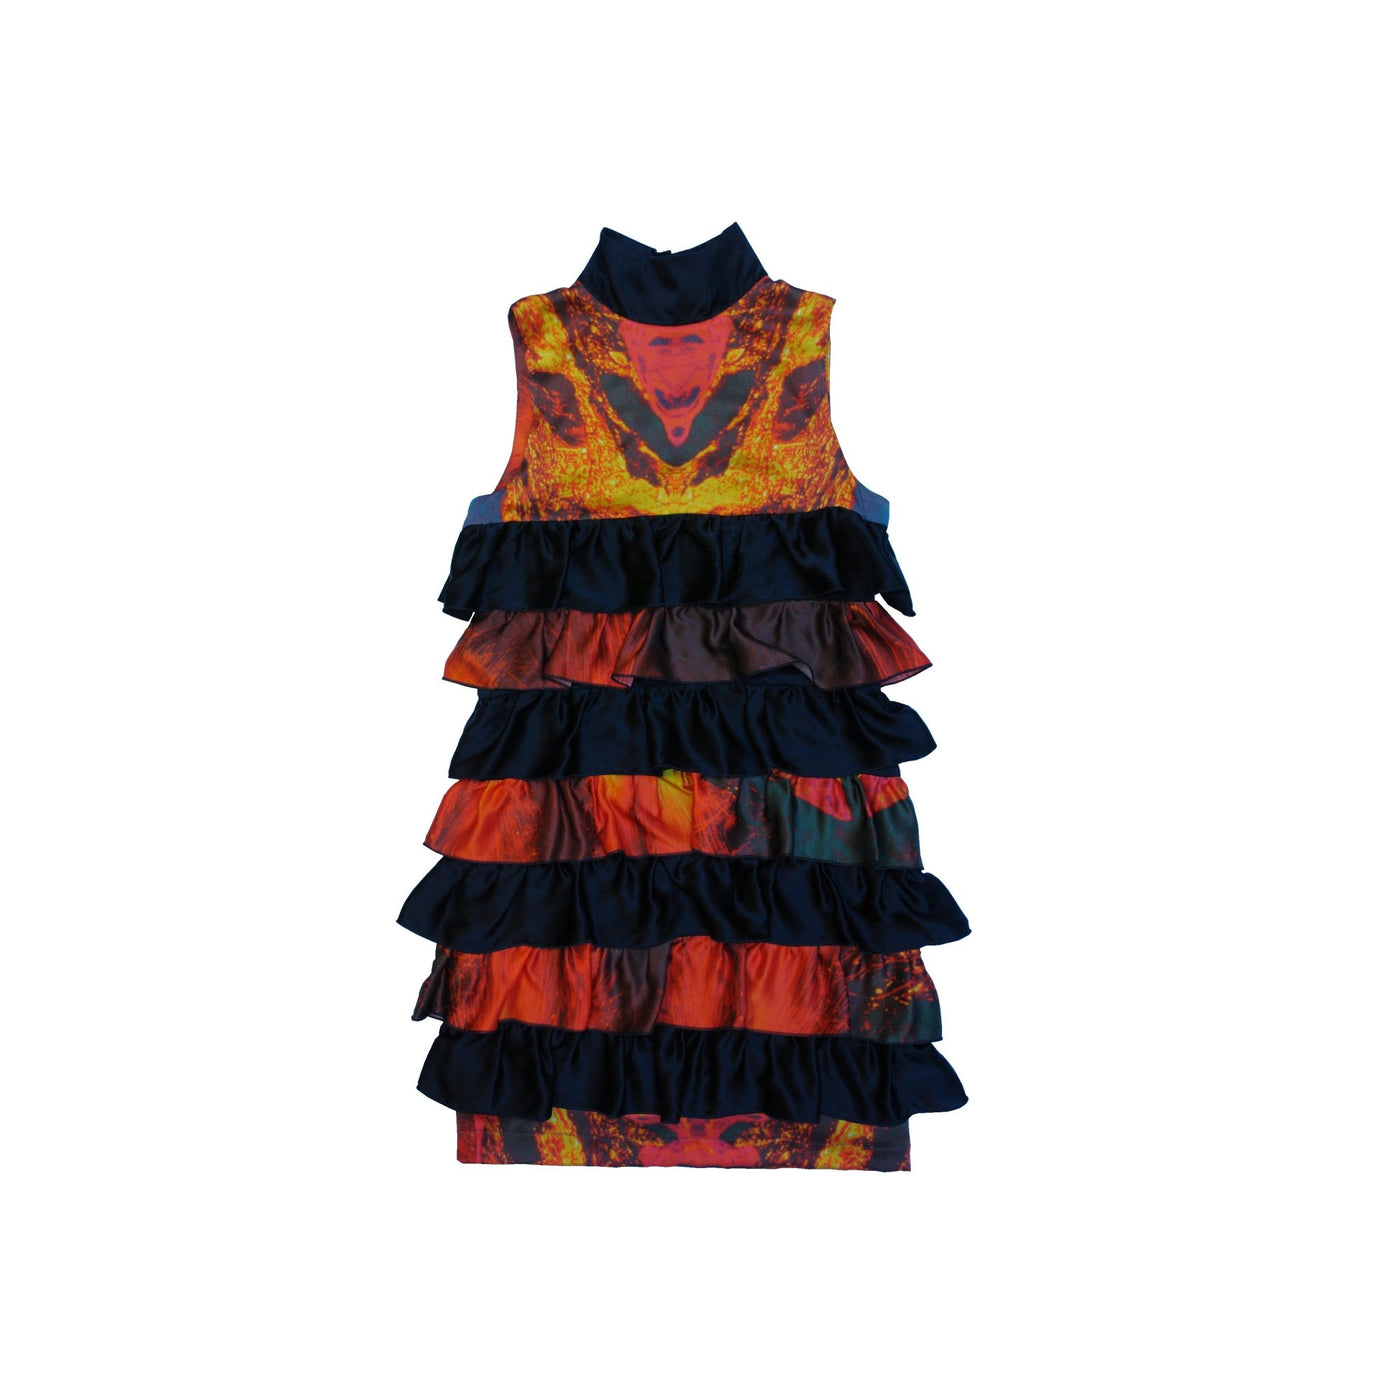 LAVA FRILL DRESS - The Clothing LoungeTramp in Disguise